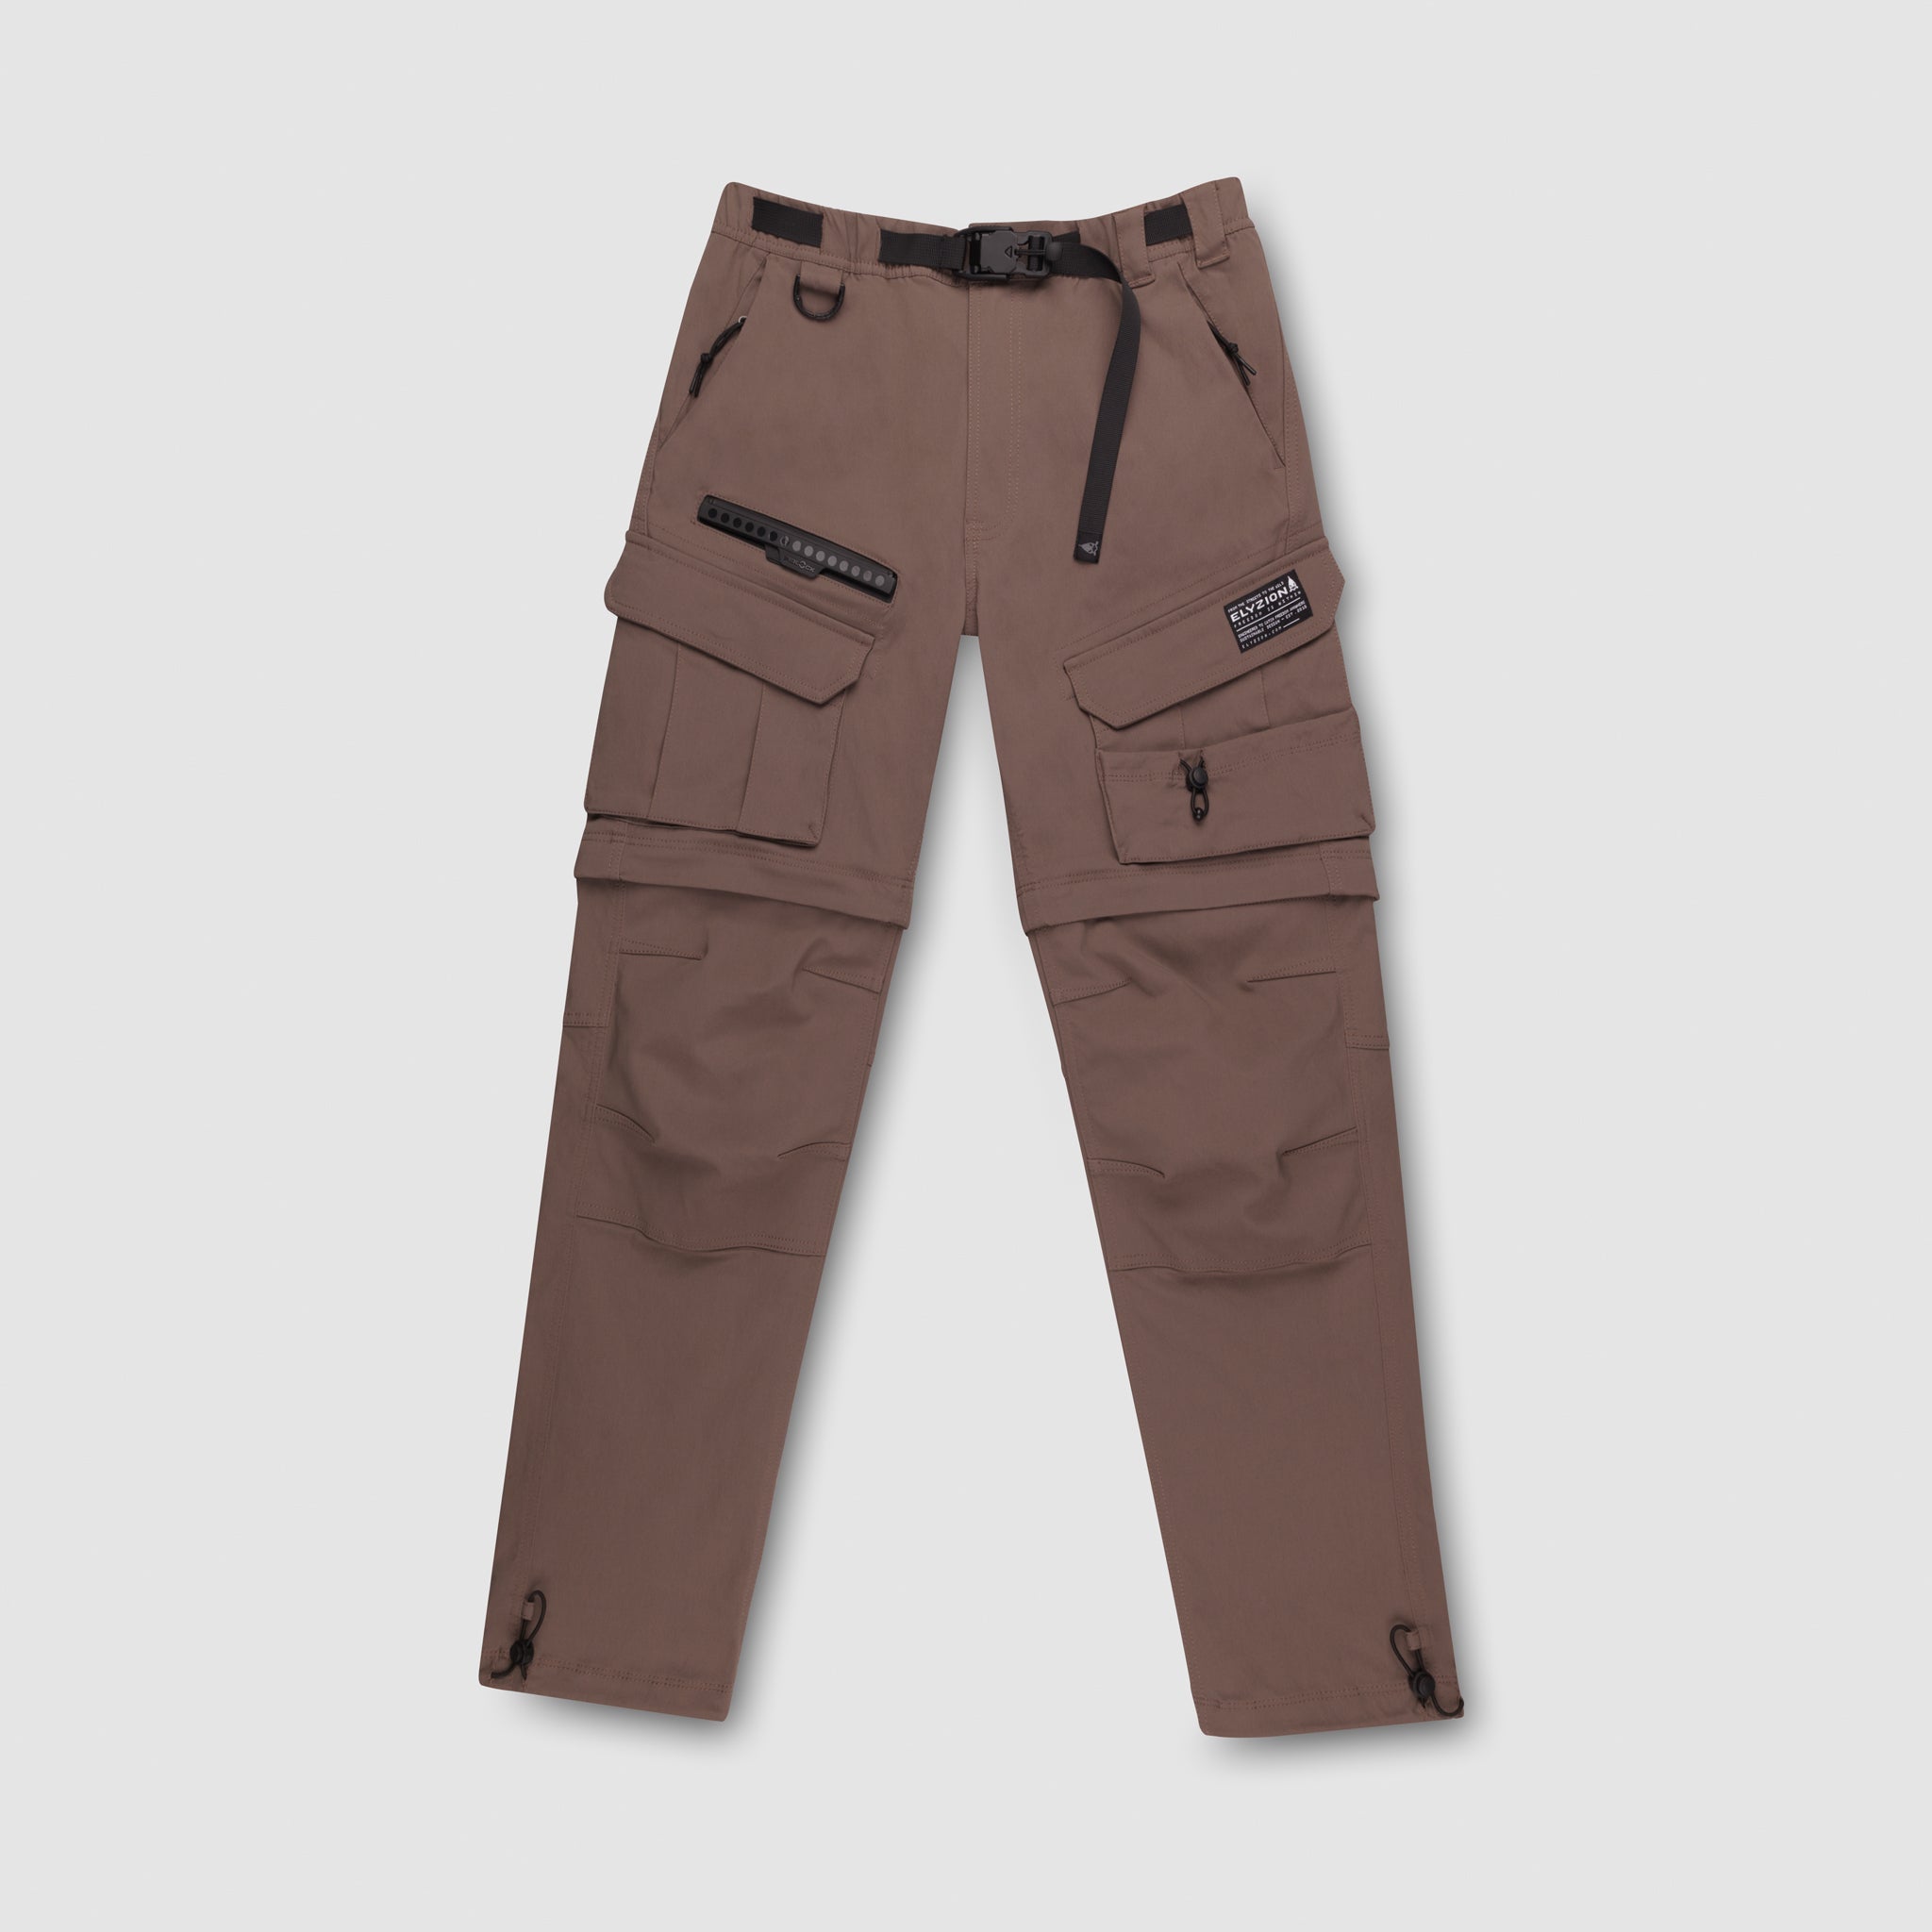 Convertible cargo pant – Against odds